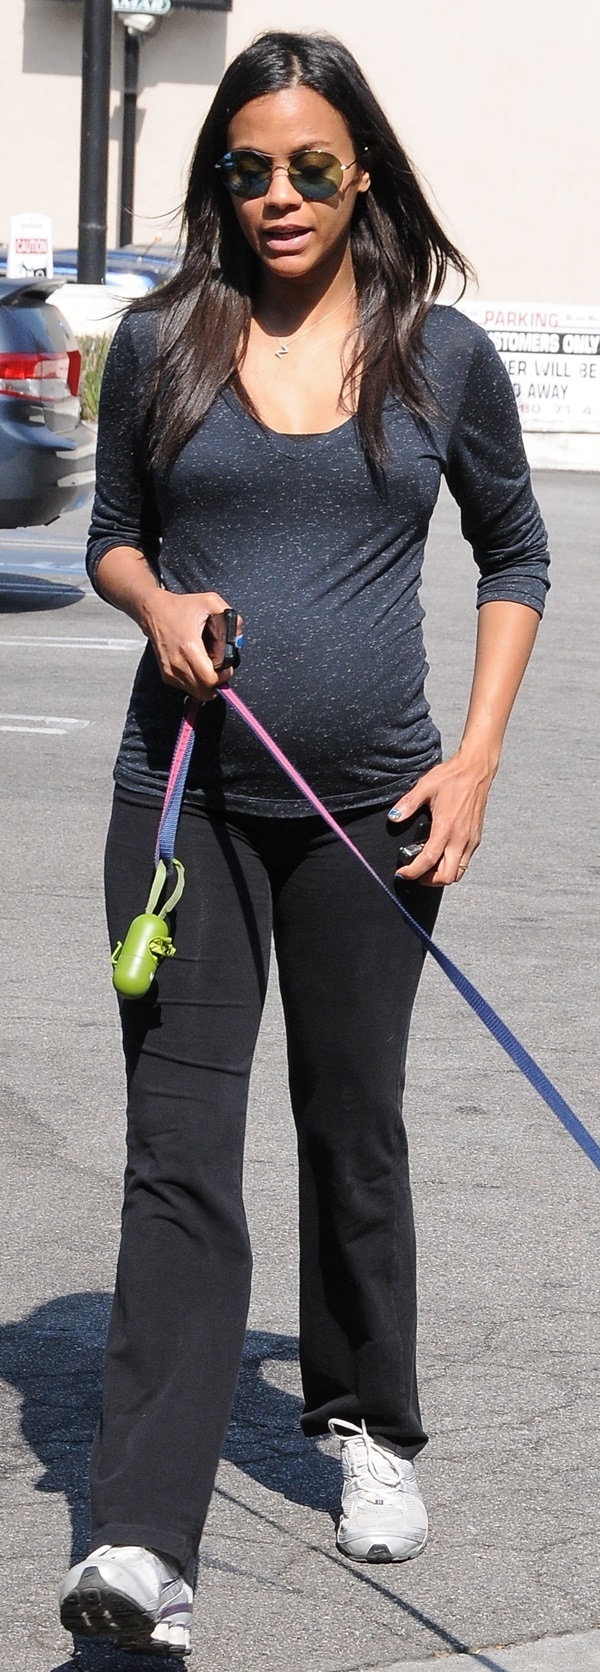 Zoe Saldana wearing a pair of comfortable Nike running shoes while walking her dog in Studio City, California, on August 21, 2014